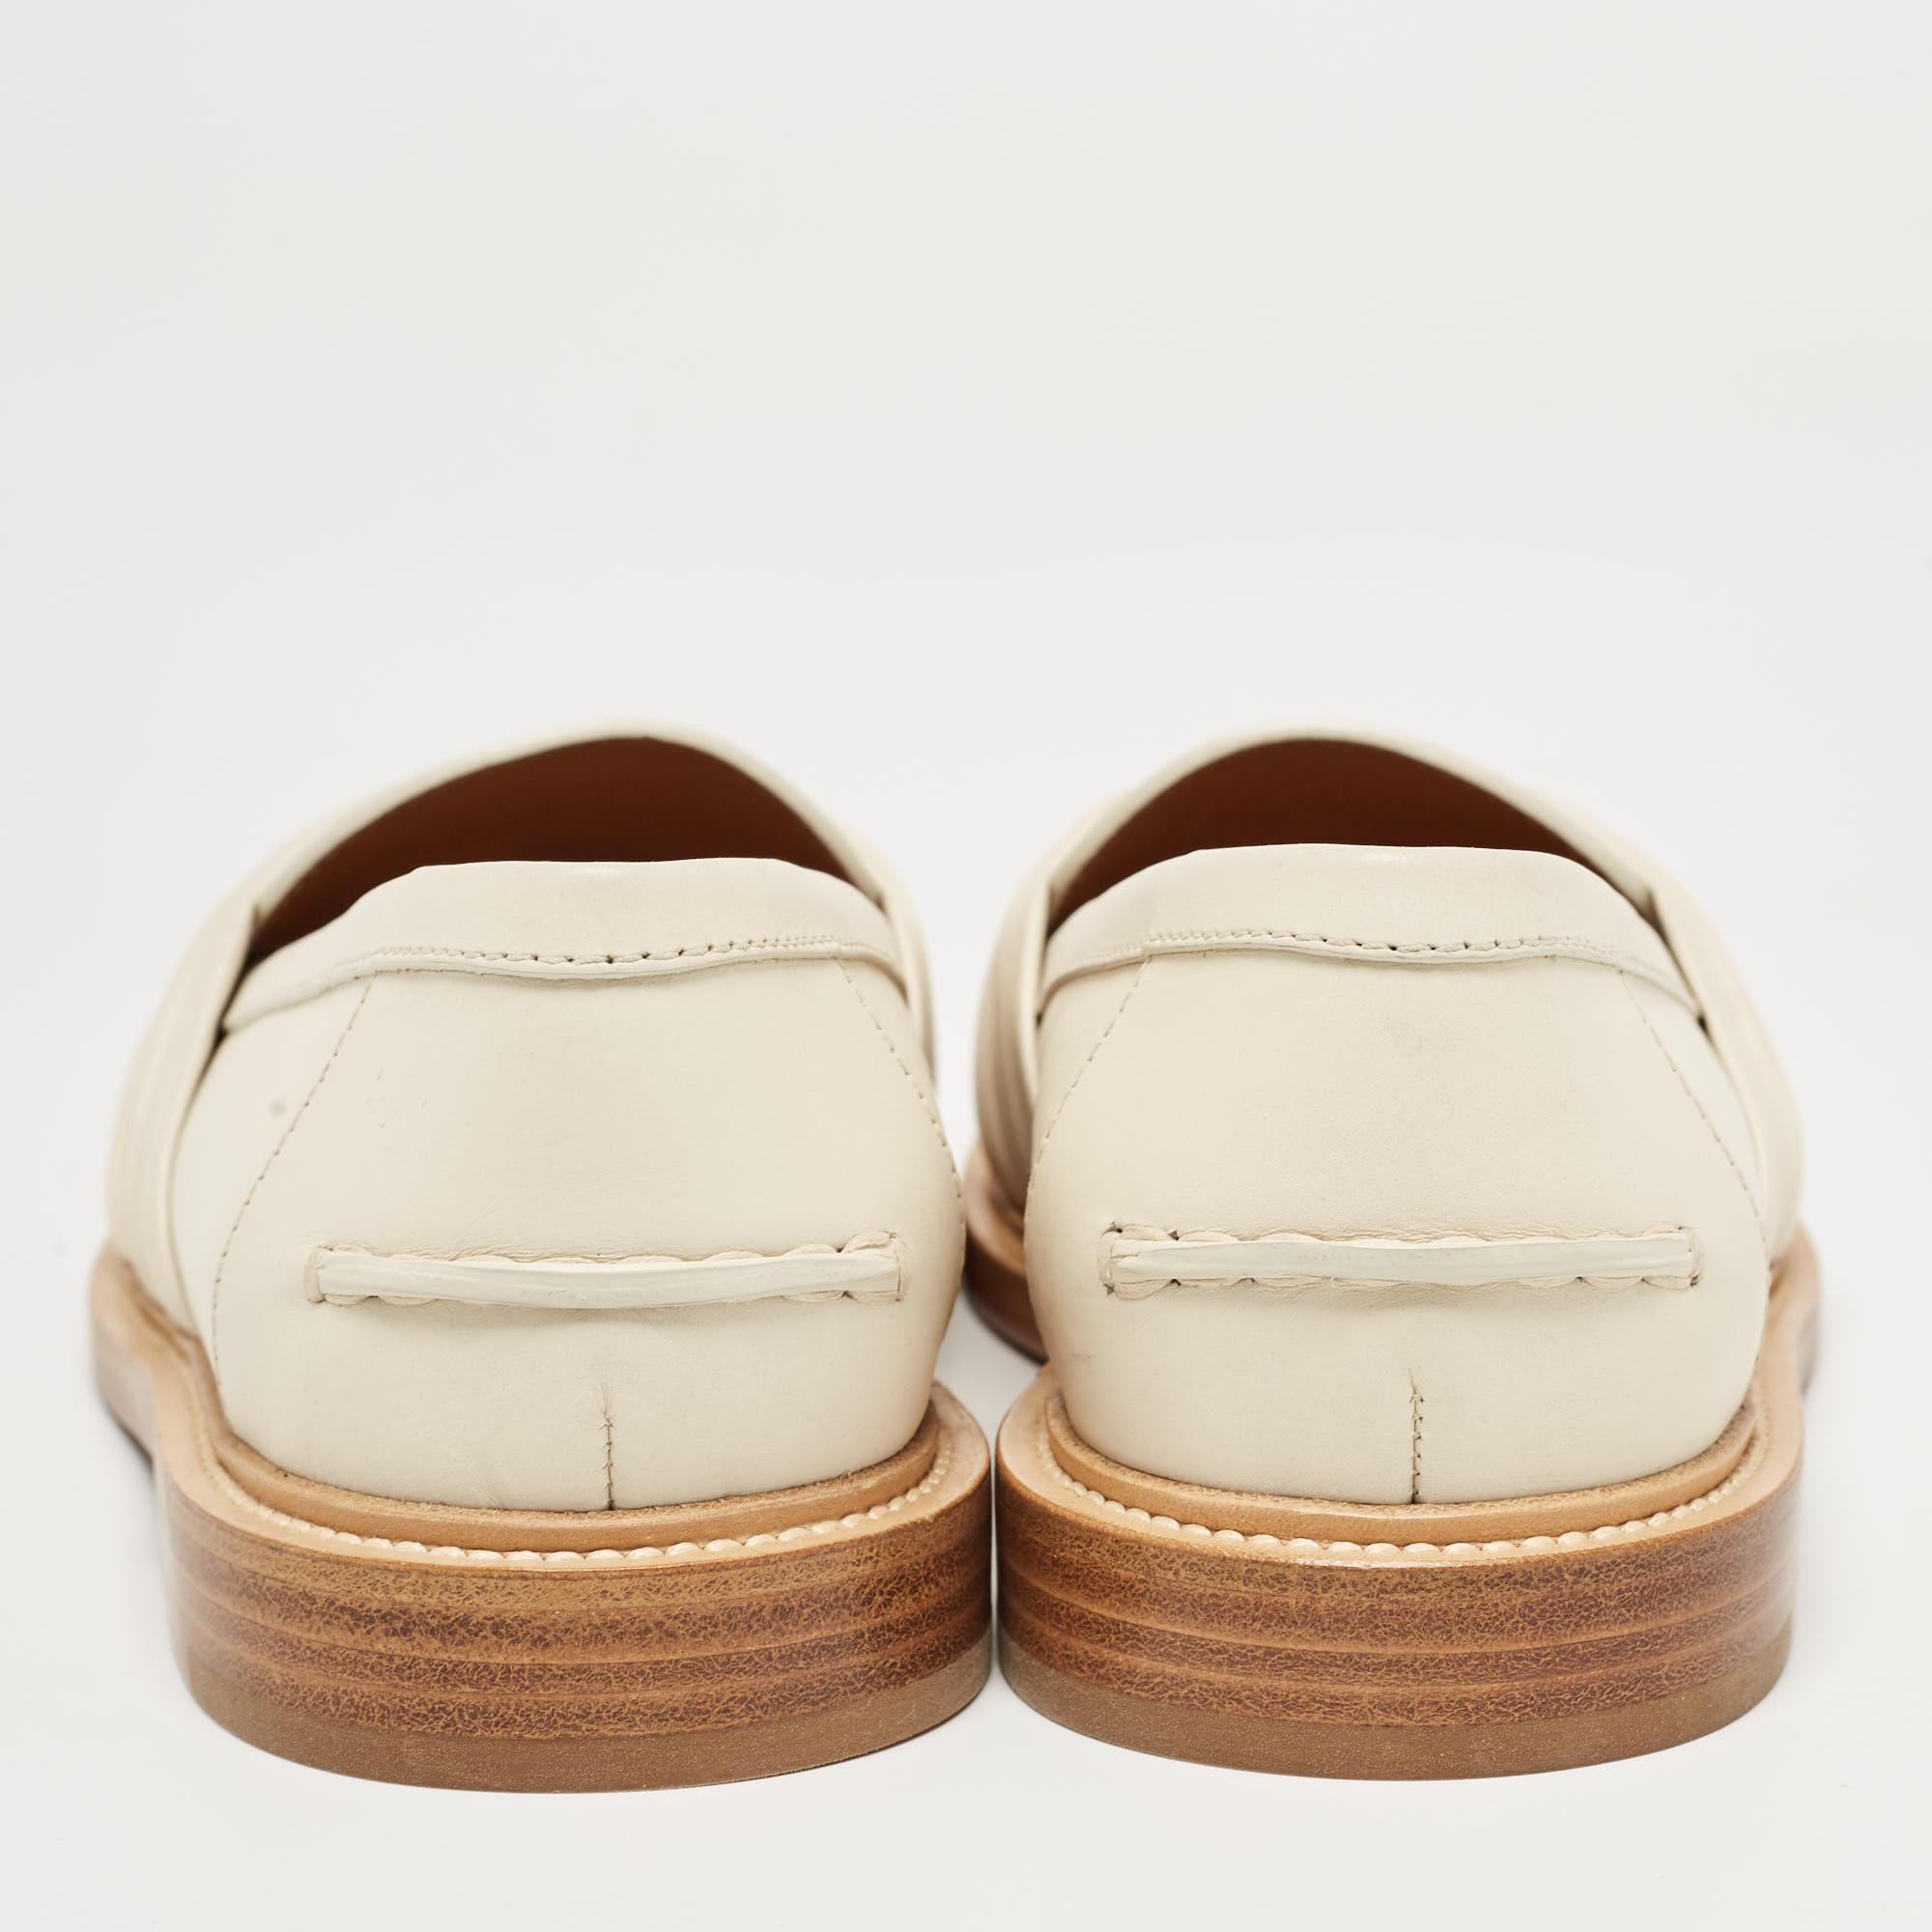 Let this comfortable pair be your first choice when you're out for a long day. These Chloe loafers have well-sewn uppers beautifully set on durable soles.

Includes: Original Dustbag, Branded Box